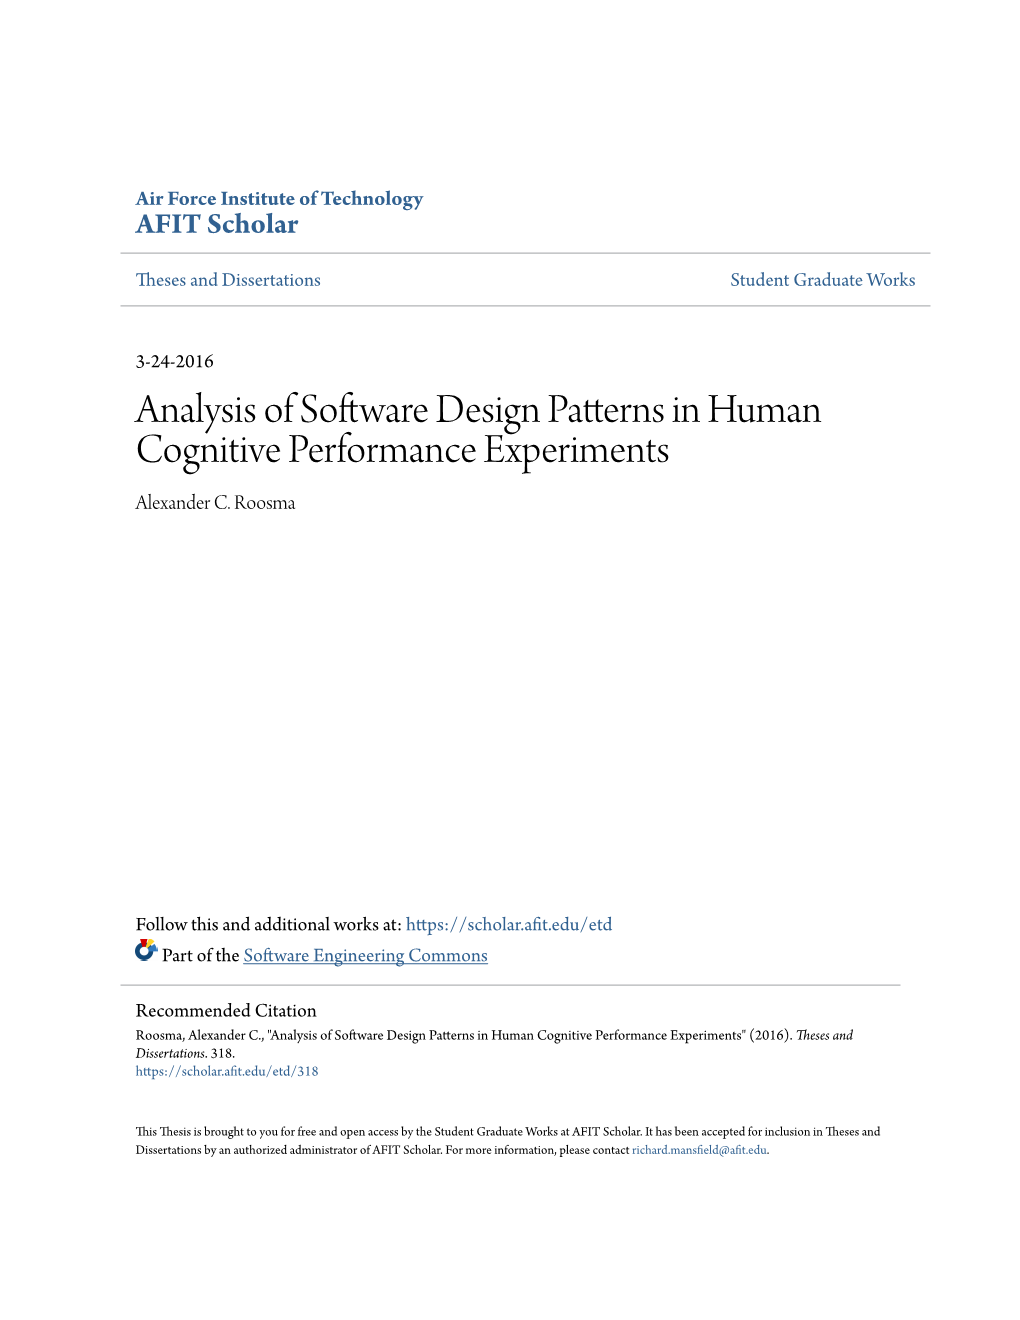 Analysis of Software Design Patterns in Human Cognitive Performance Experiments Alexander C